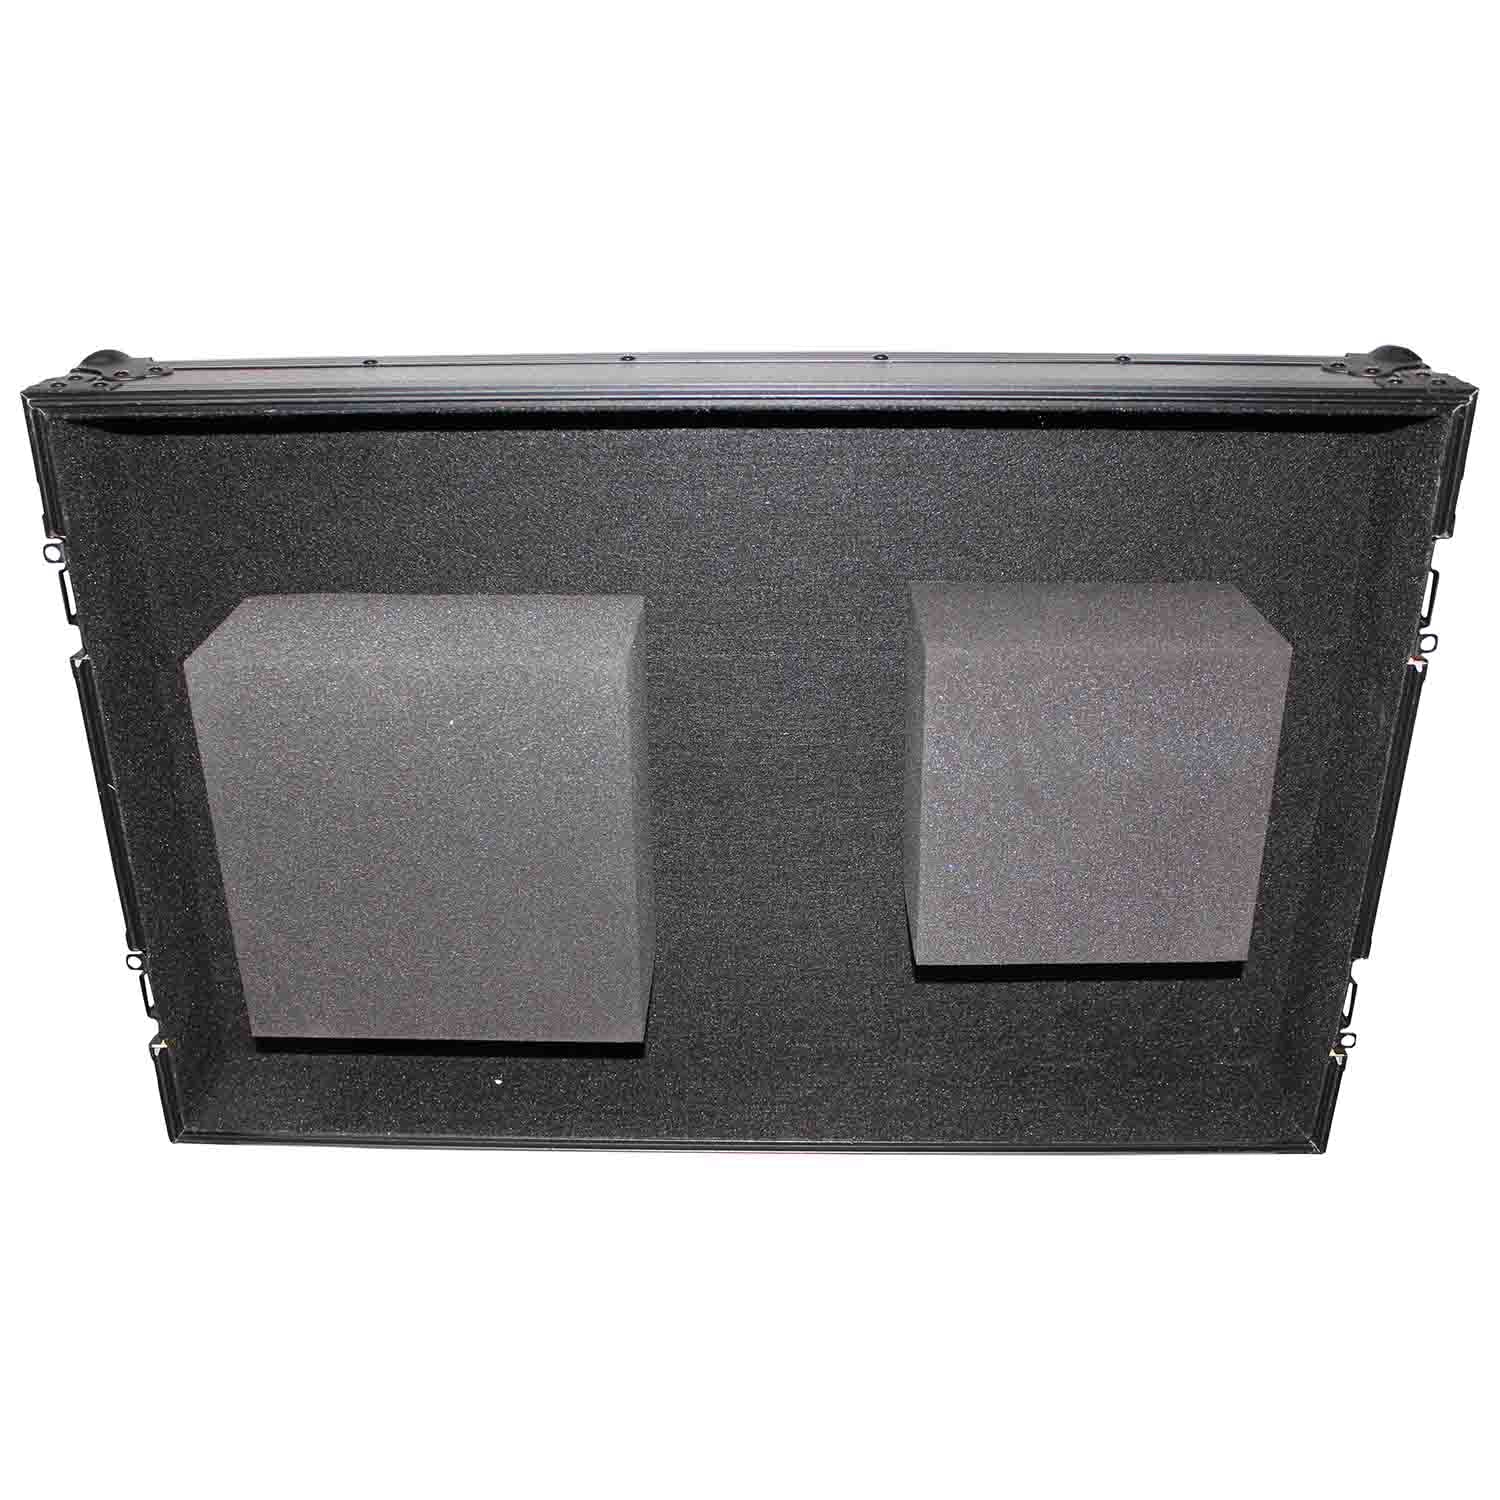 ProX XS-TMC1012WBL DJ Flight Case For Single Turntable In Battle Mode and 10 Inch or 12 Inch Mixer - Black on Black ProX Cases